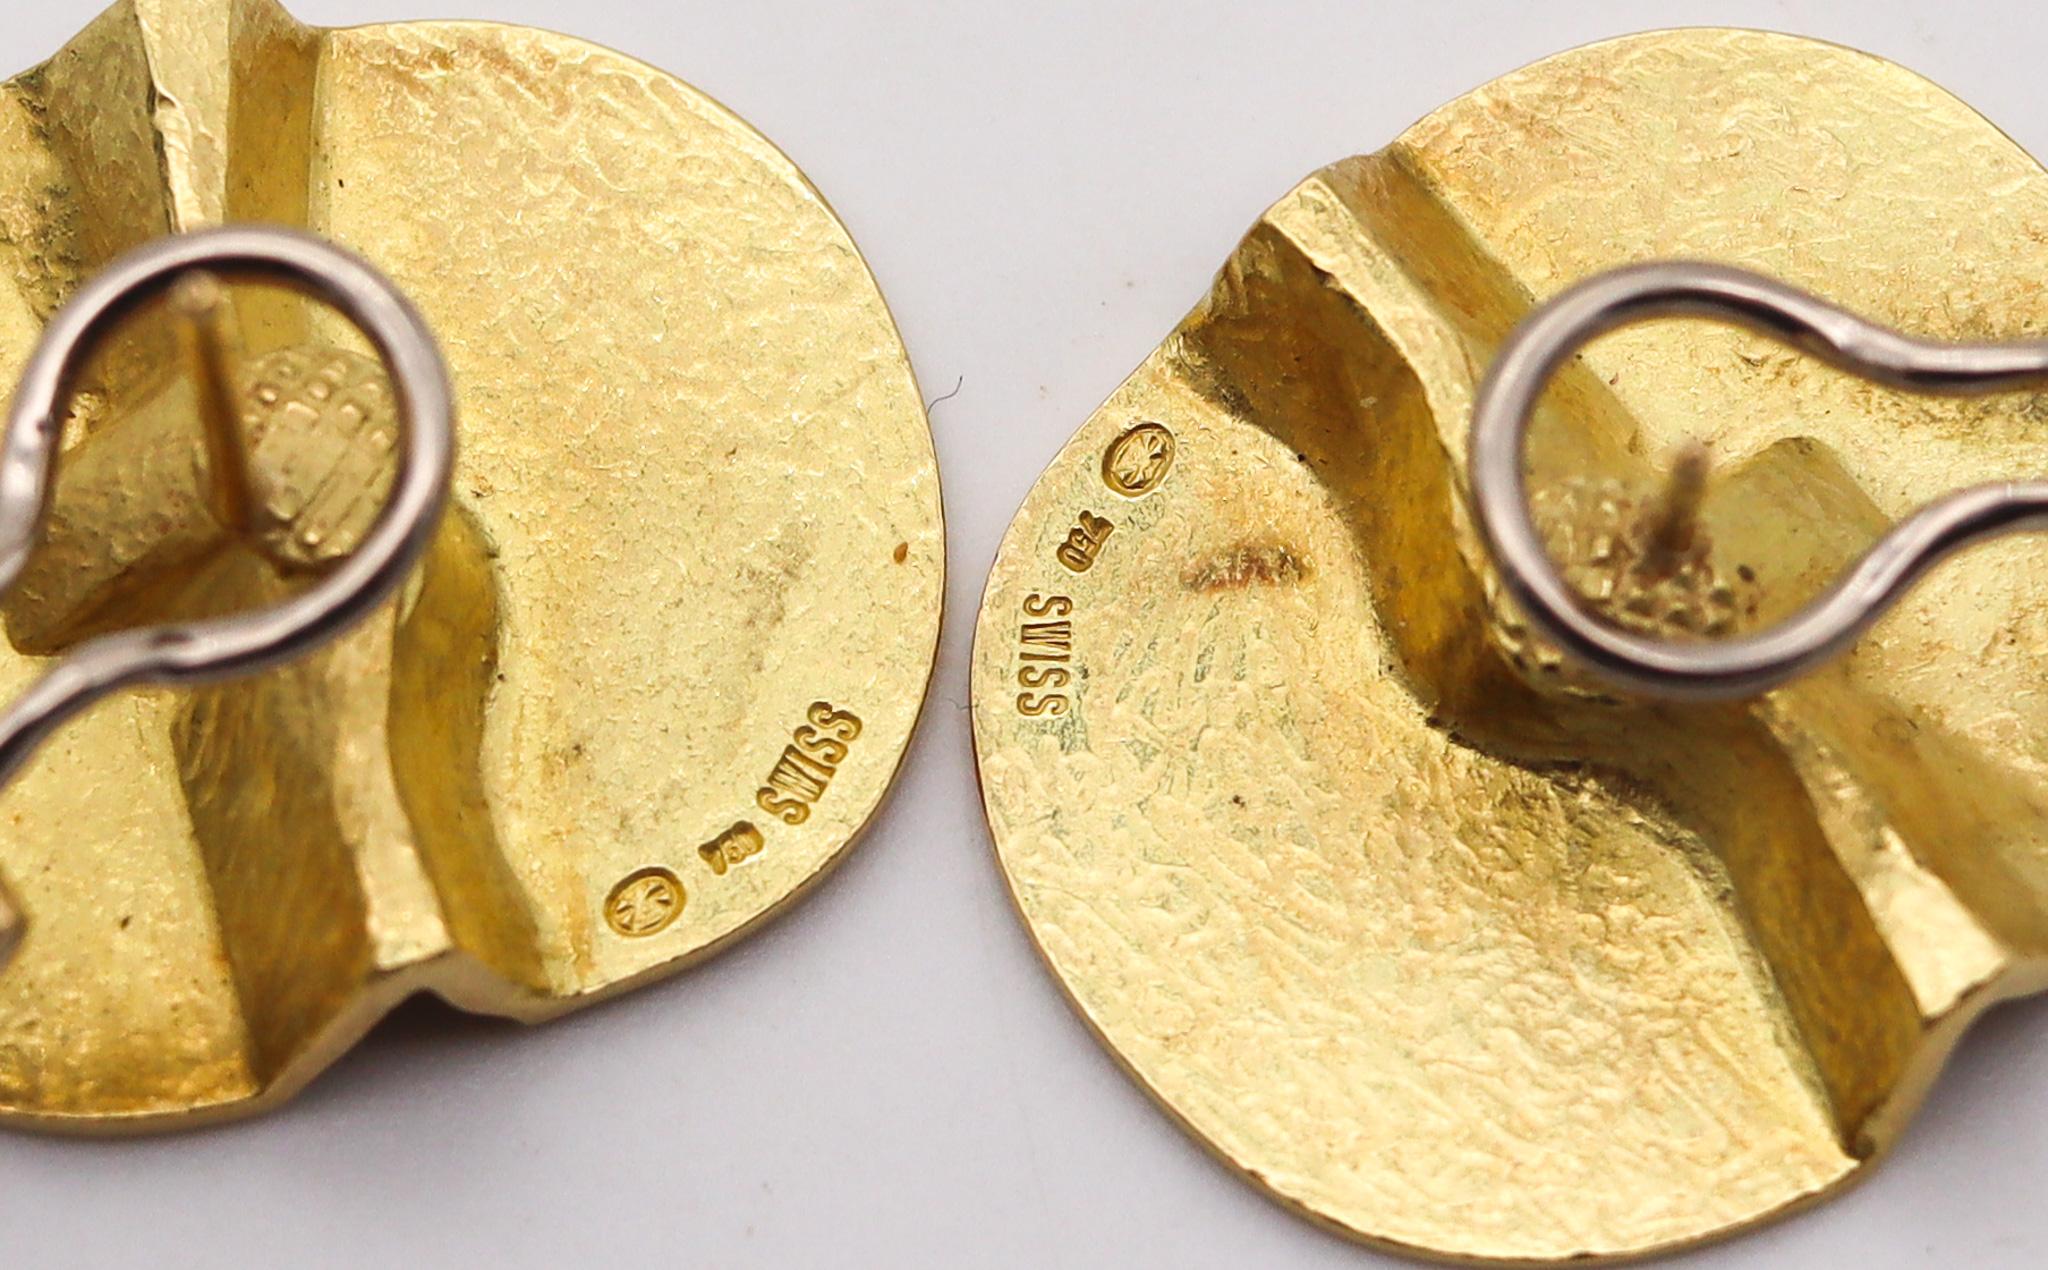 Gubelin 1970 Grand Canyon Fractured Clips-On Earrings In Solid 18Kt Yellow Gold In Excellent Condition For Sale In Miami, FL